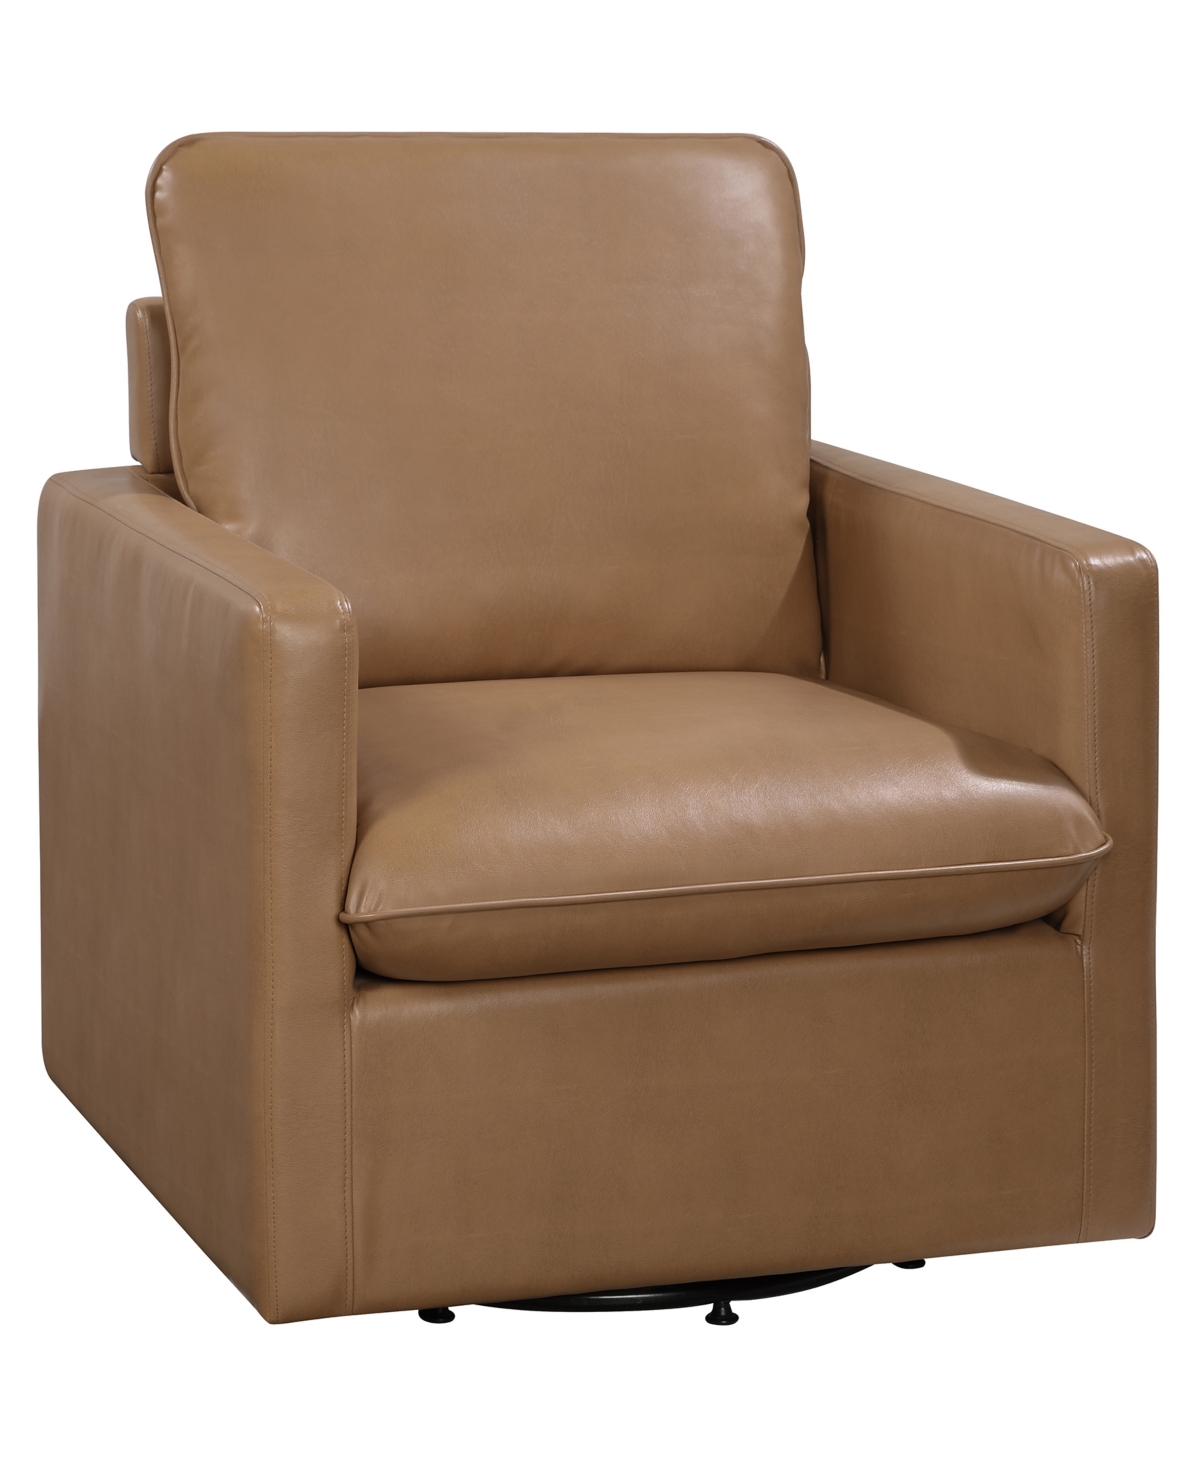 Furniture Of America Mira 34.5" Faux Leather Swivel Chair In Brown